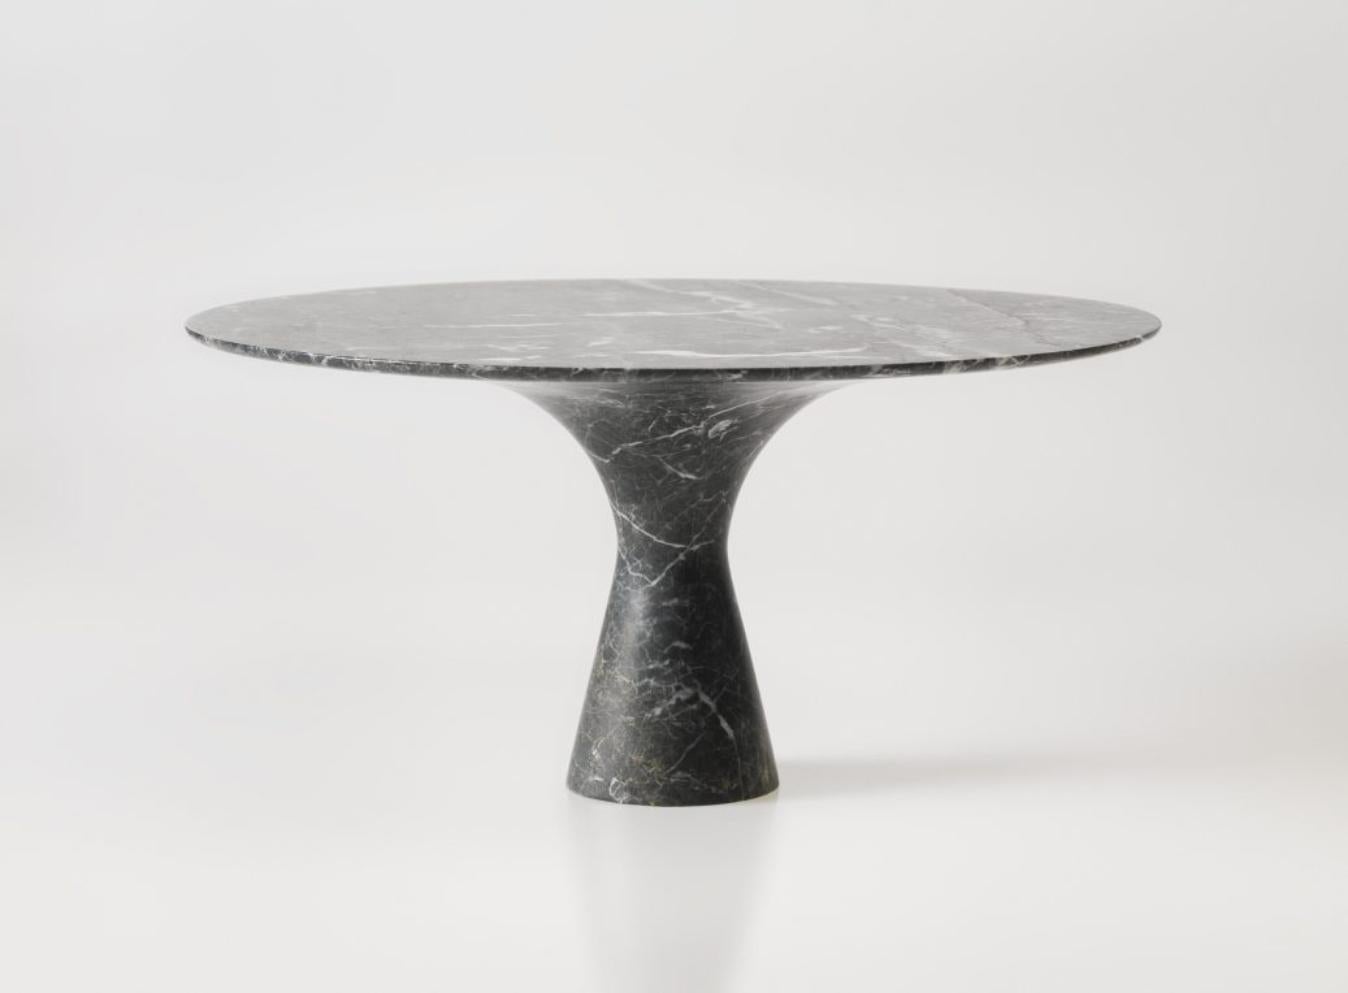 Grey Saint Laurent Refined Contemporary Marble Dining Table 250/75 For Sale 6